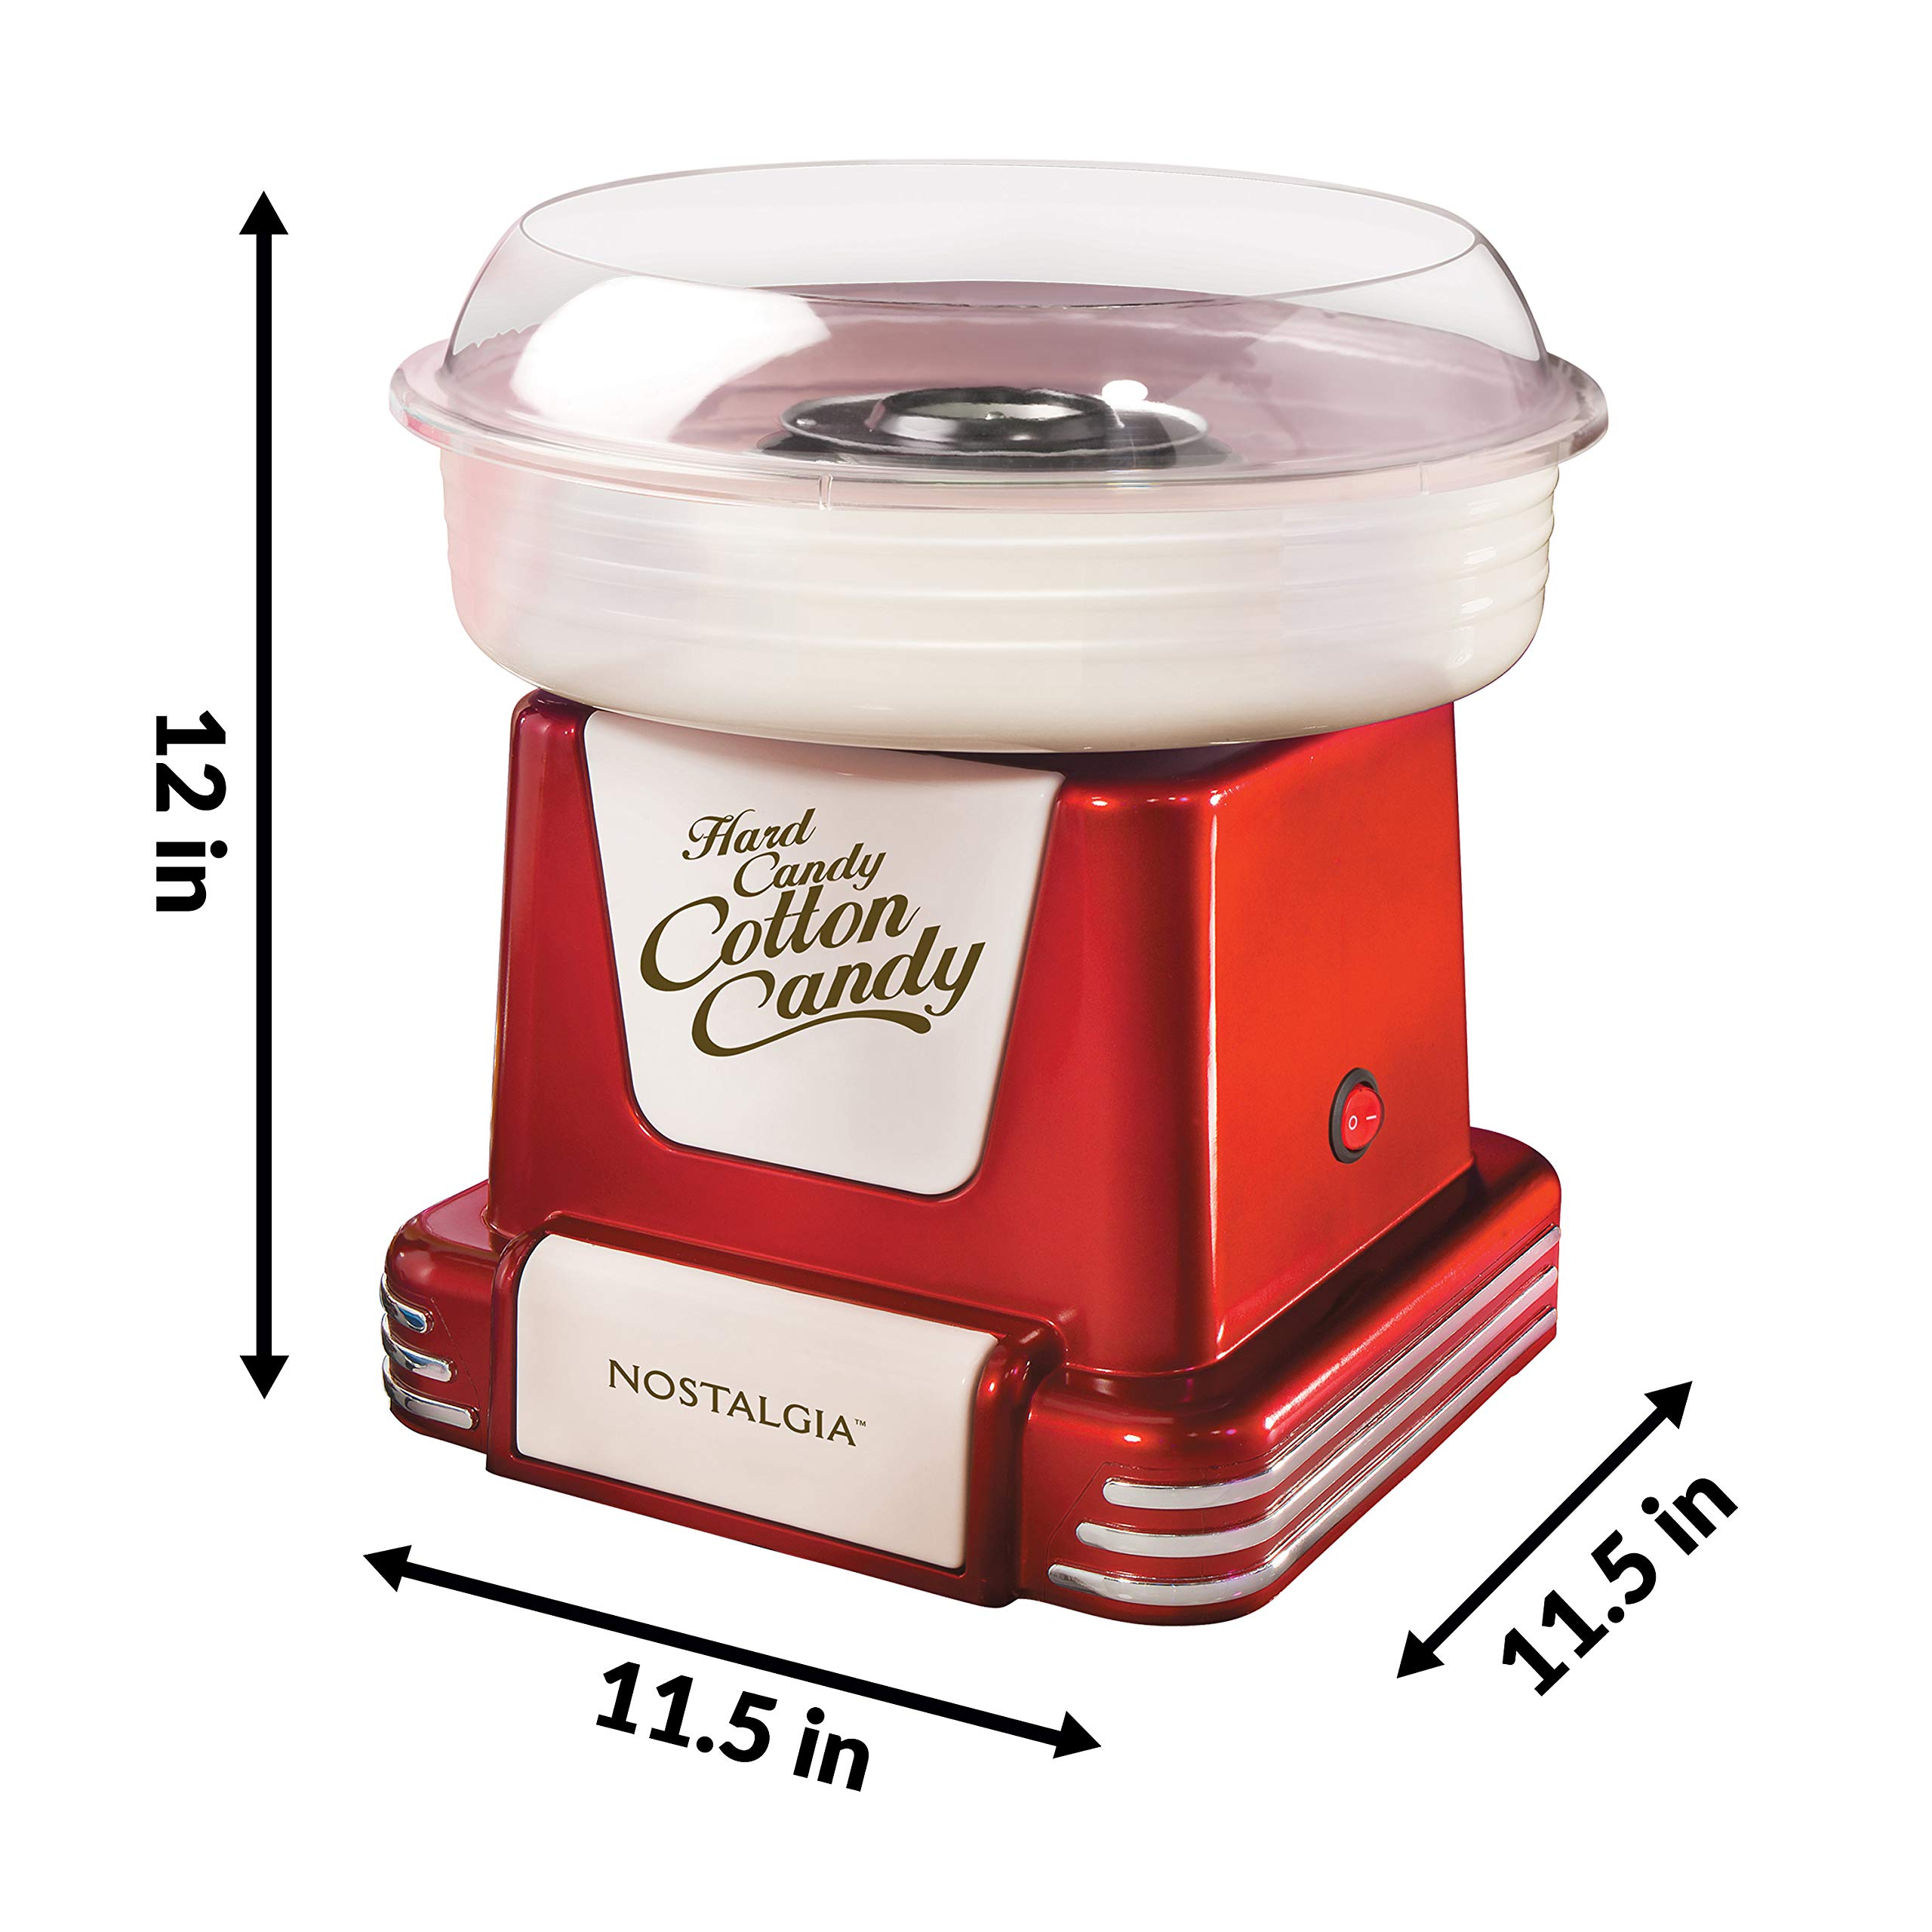 Nostalgia Retro Countertop Cotton Candy Maker, Vintage Candy Machine for Hard Candy & Flossing Sugar, Includes 2 reusable cones, 1 sugar scoop, and 1 Extractor head, Retro Red